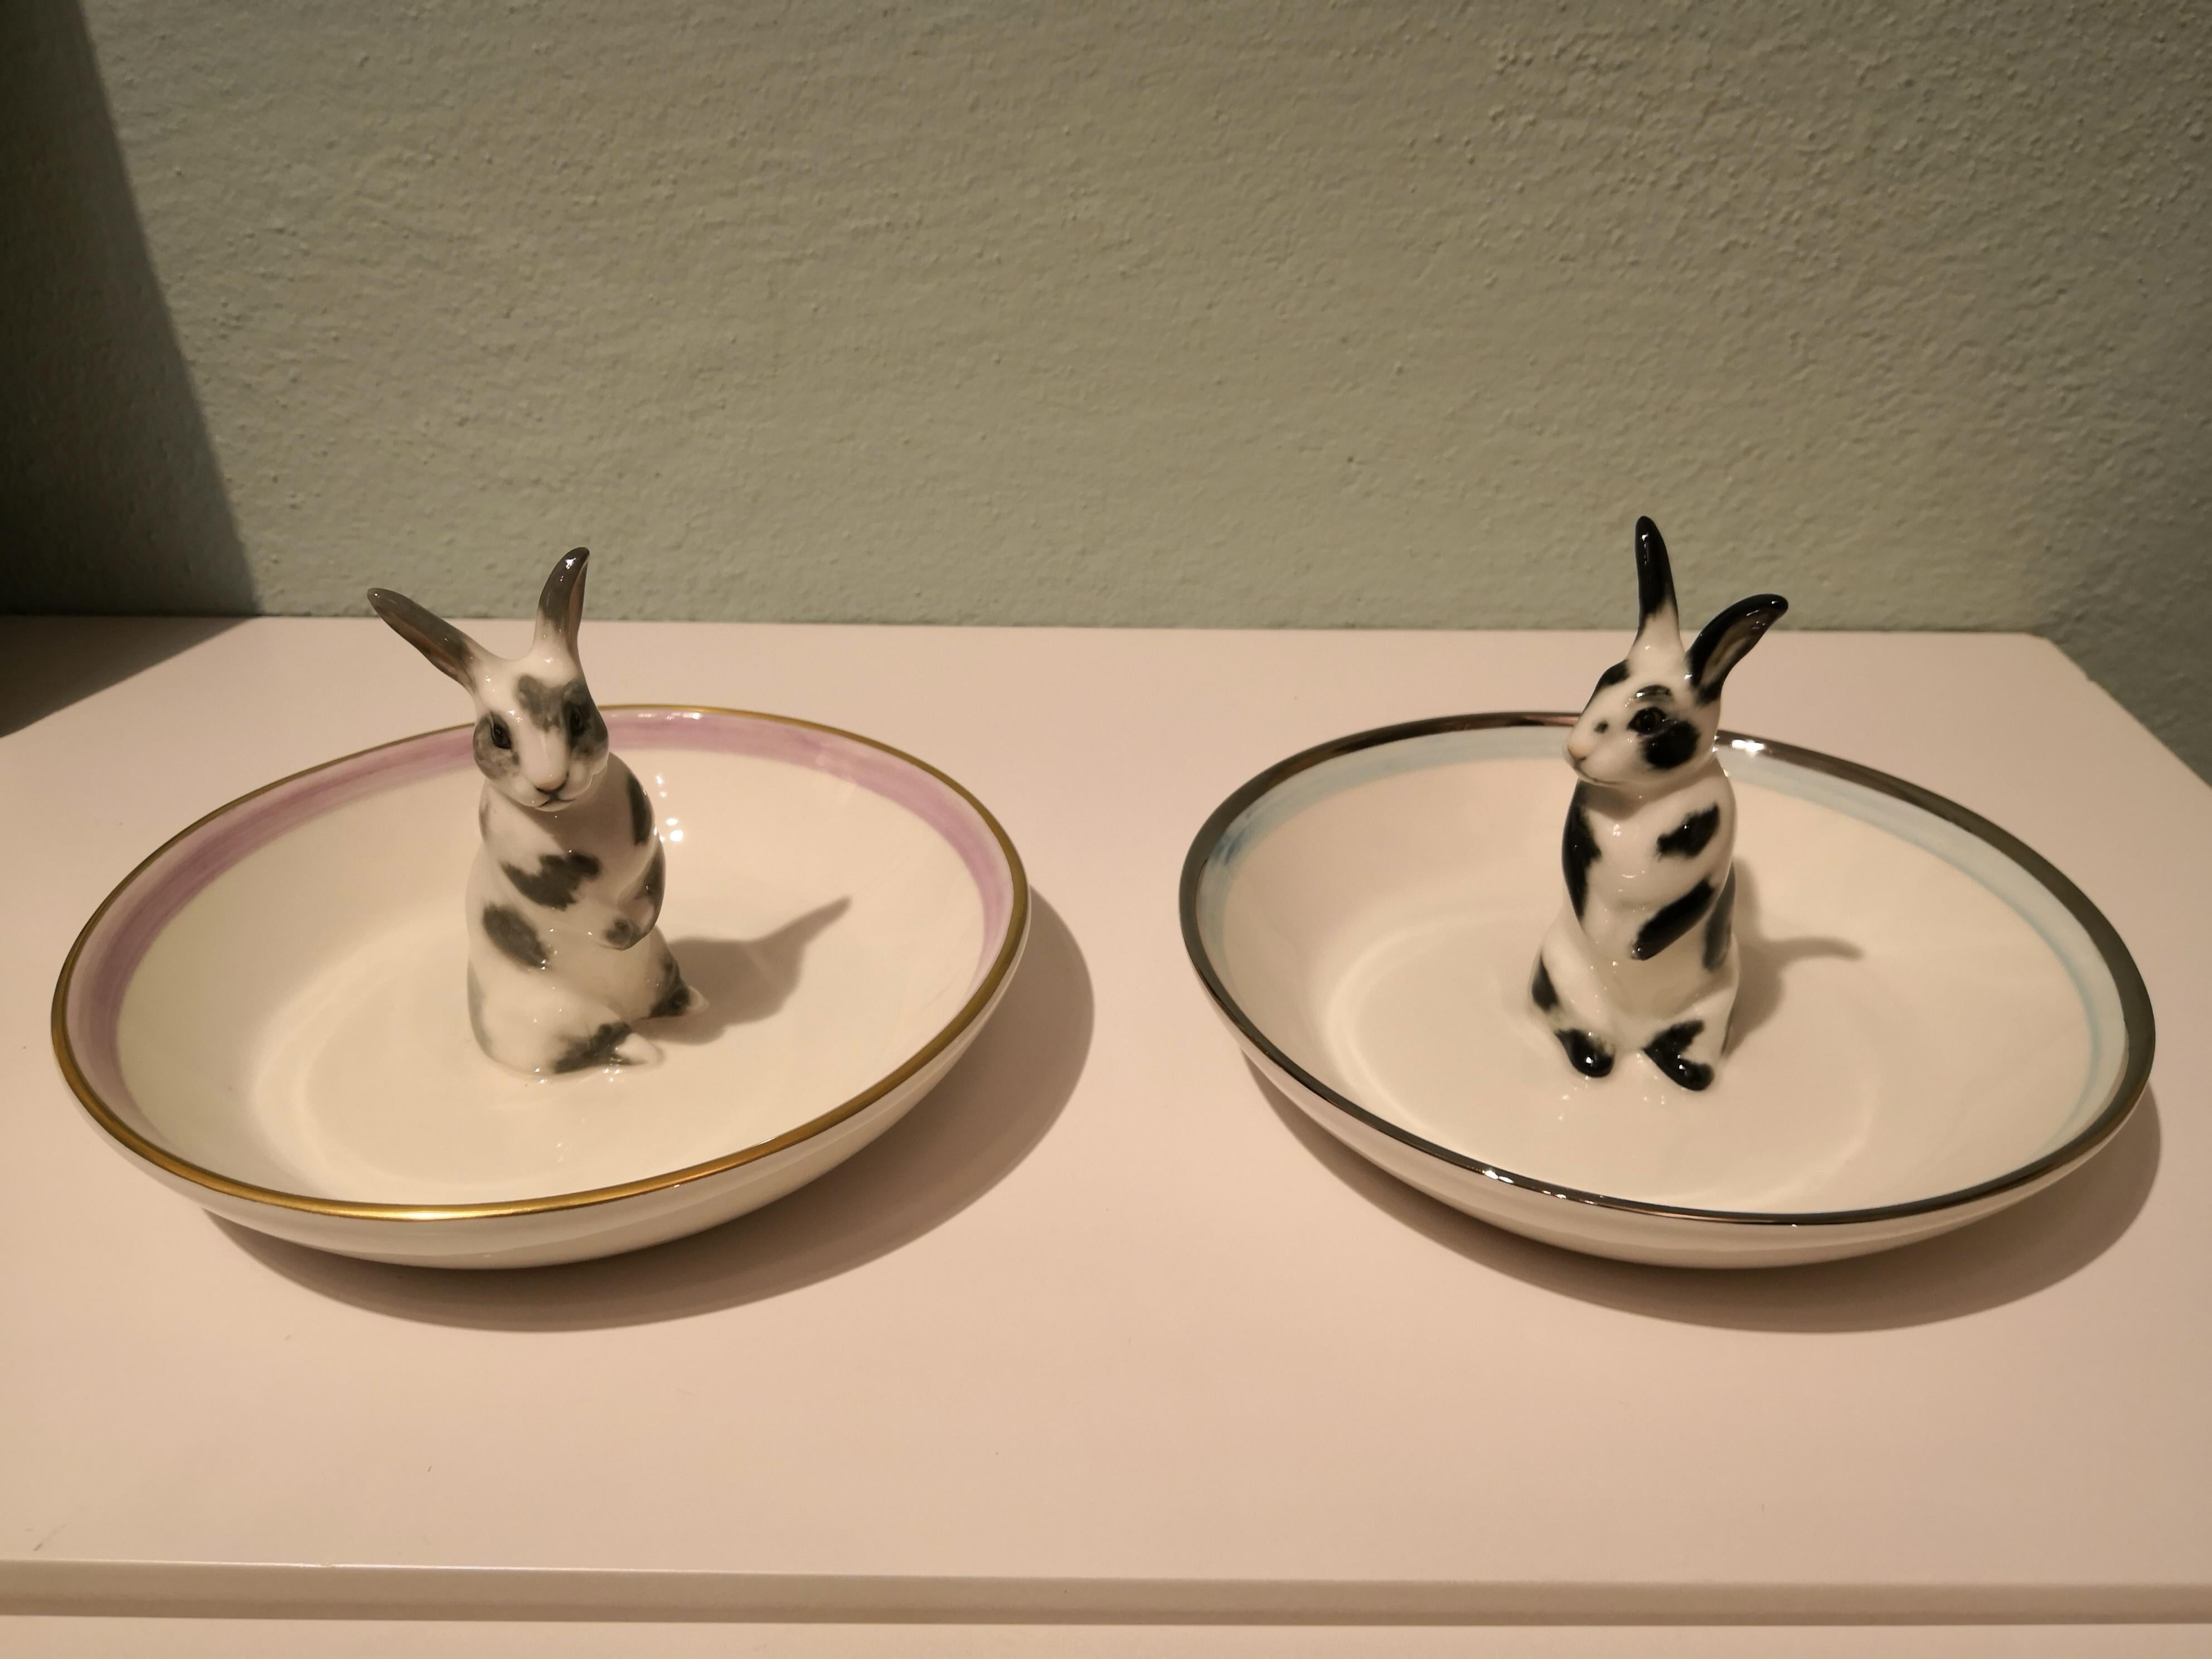 Completely handmade porcelain bowl with a hands-free naturalistic painted hare figure with black spots. The bunny is sitting in the middle of the bowl for decorating nuts or sweets around. Rimmed with a pale blue and platinum line. Handmade in